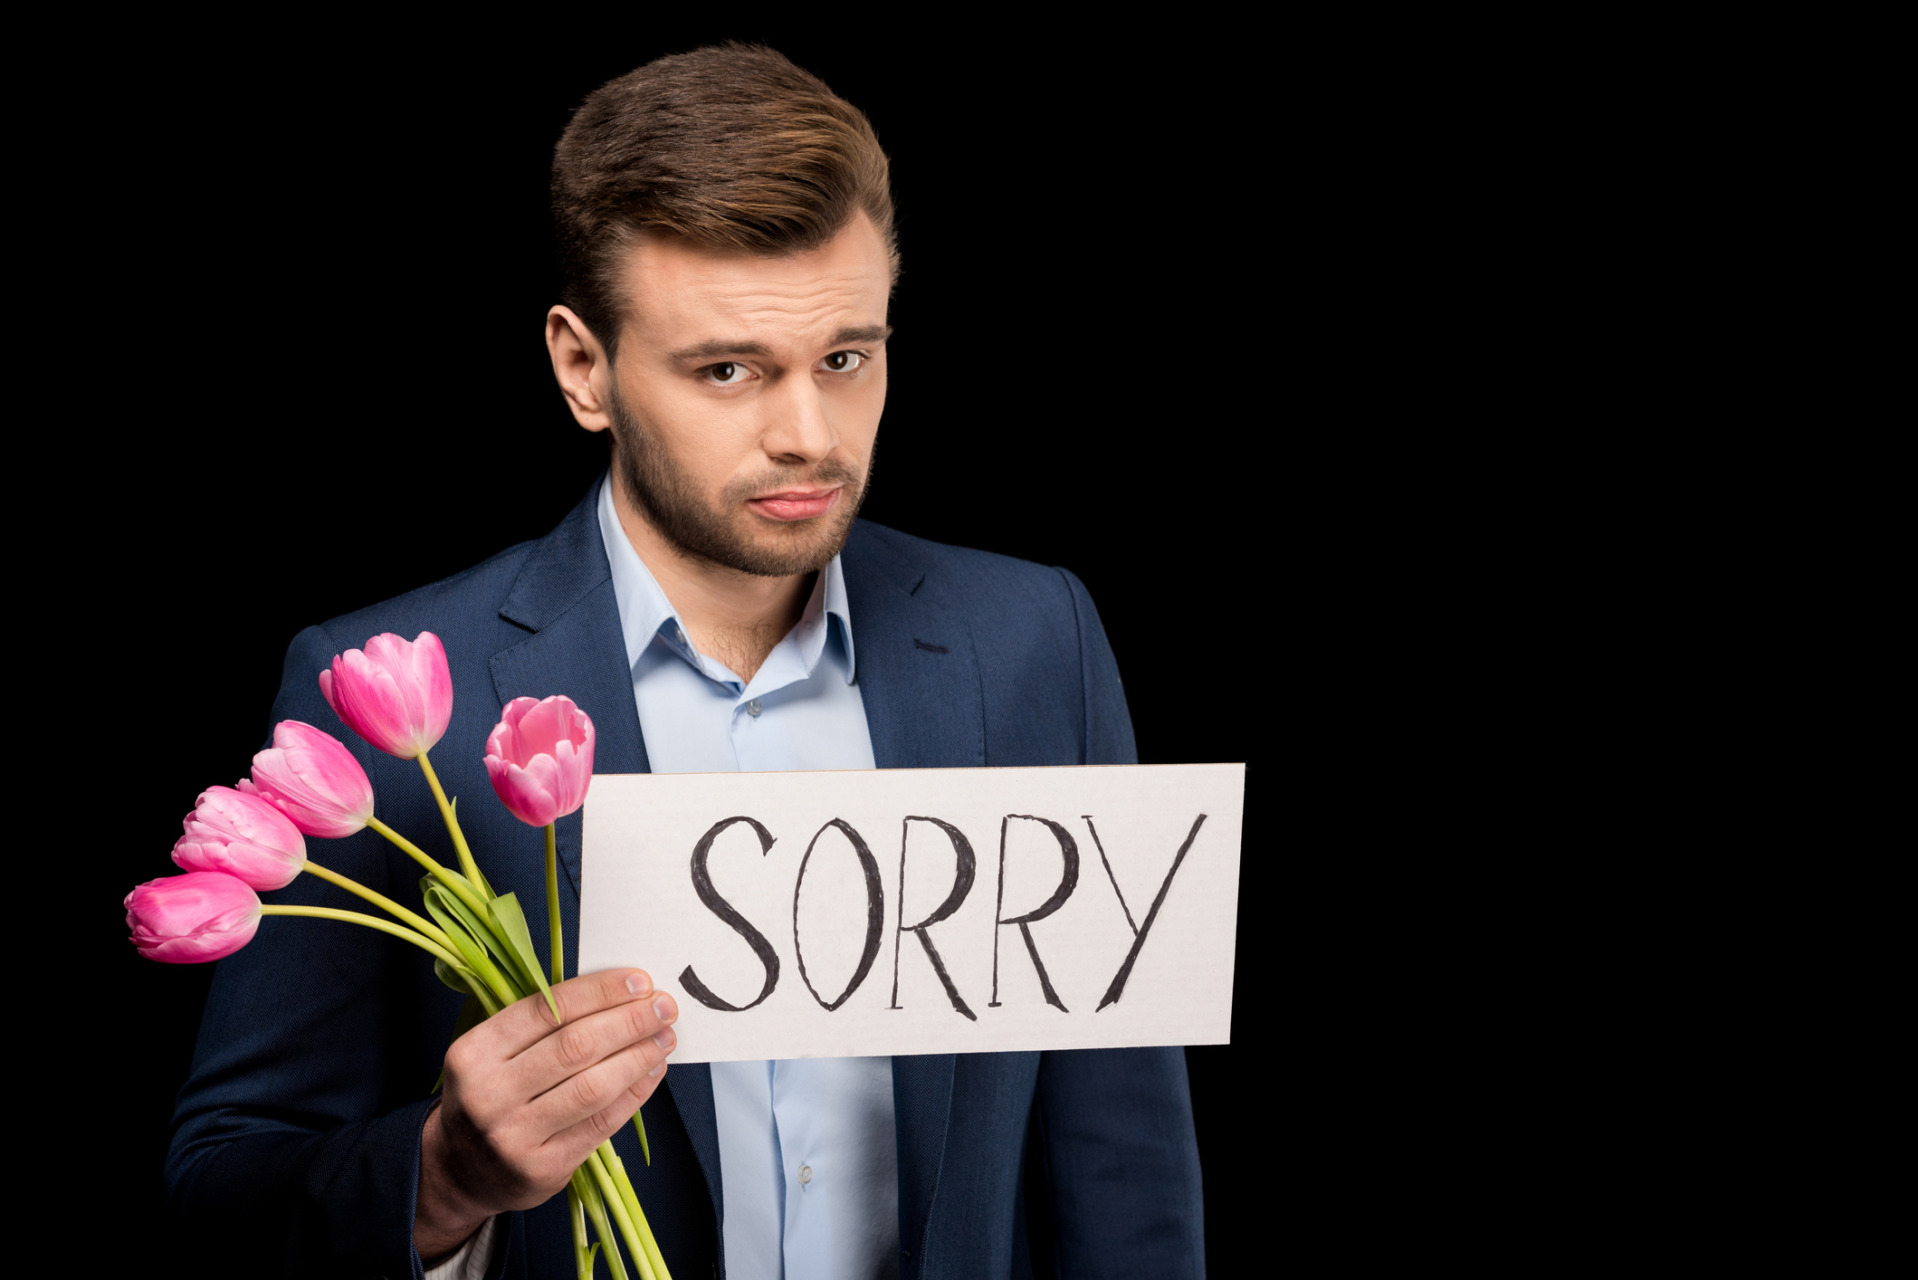 Ashamed young man with tulips and sorry sign looking at camera